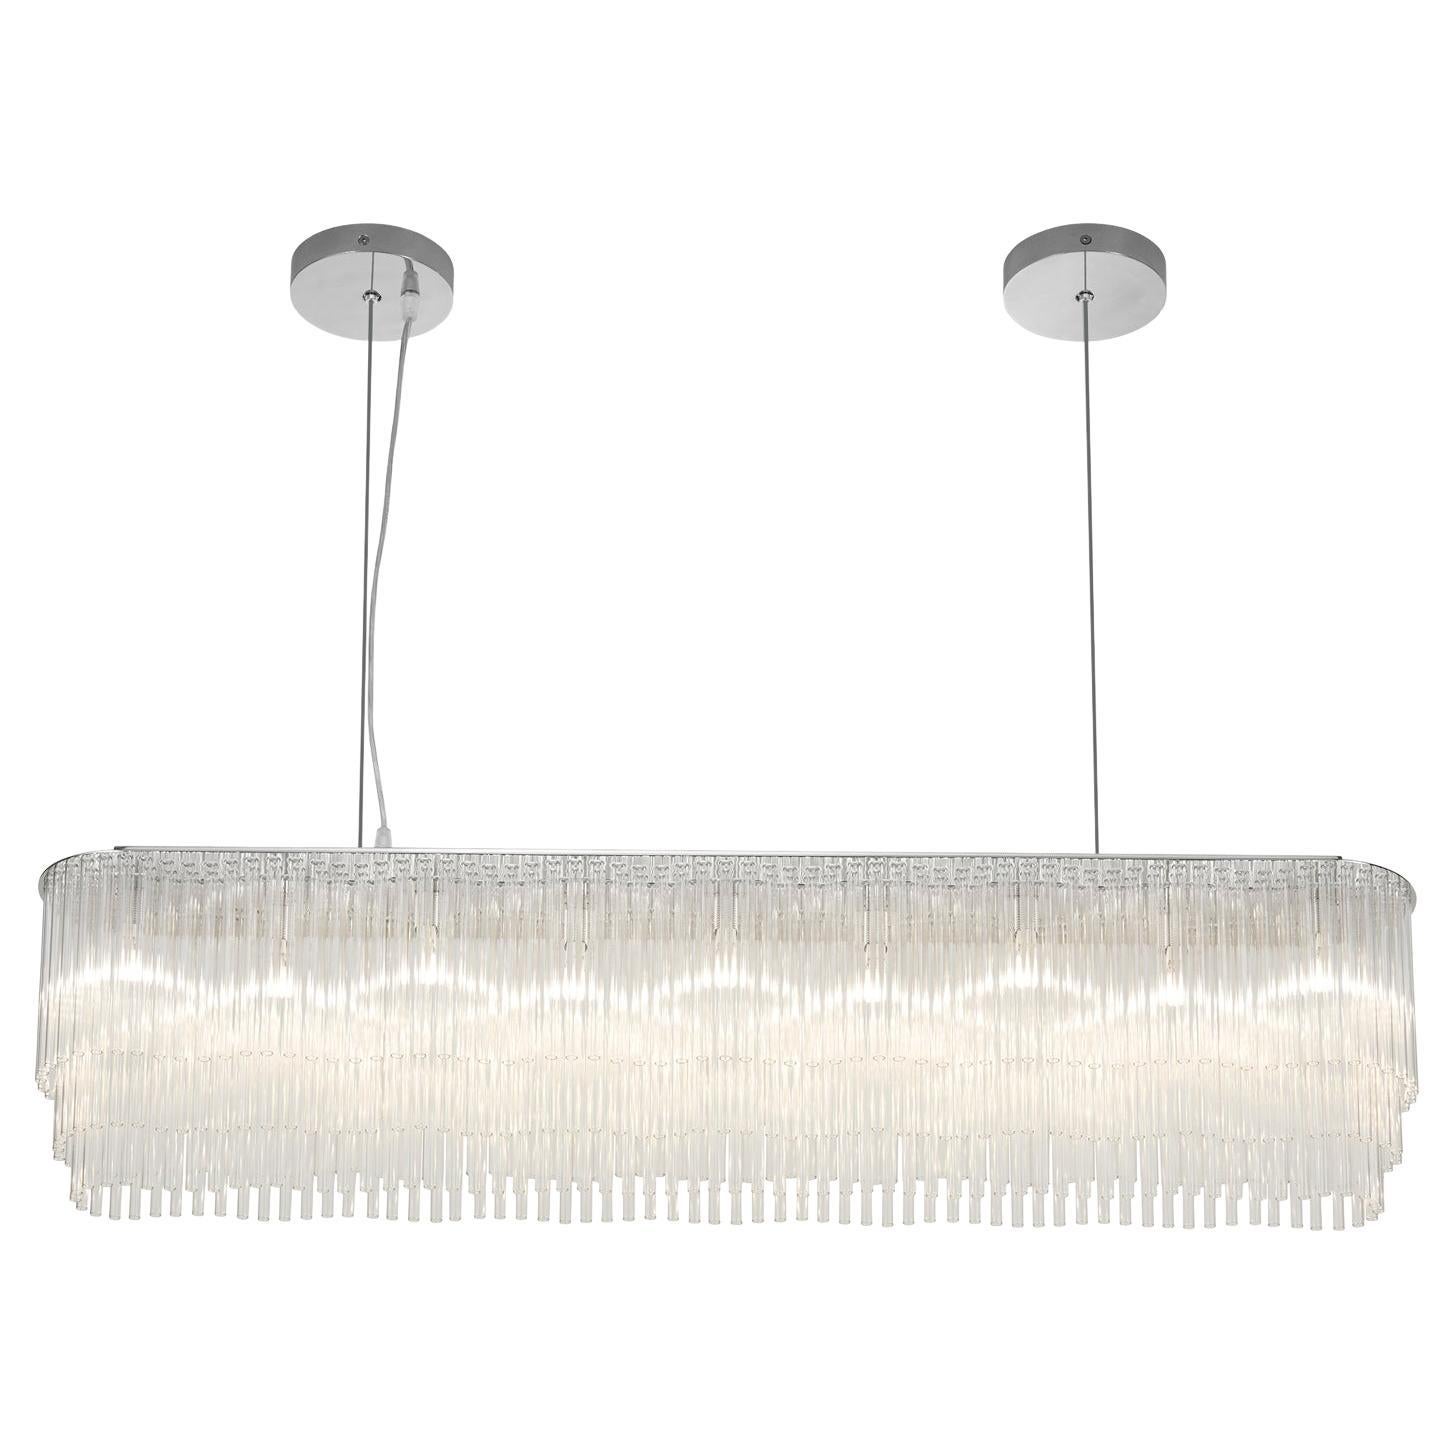 Linear Chandelier Thin 1010mm/39.75" in Polished Nickel / Tiered Glass Profile For Sale